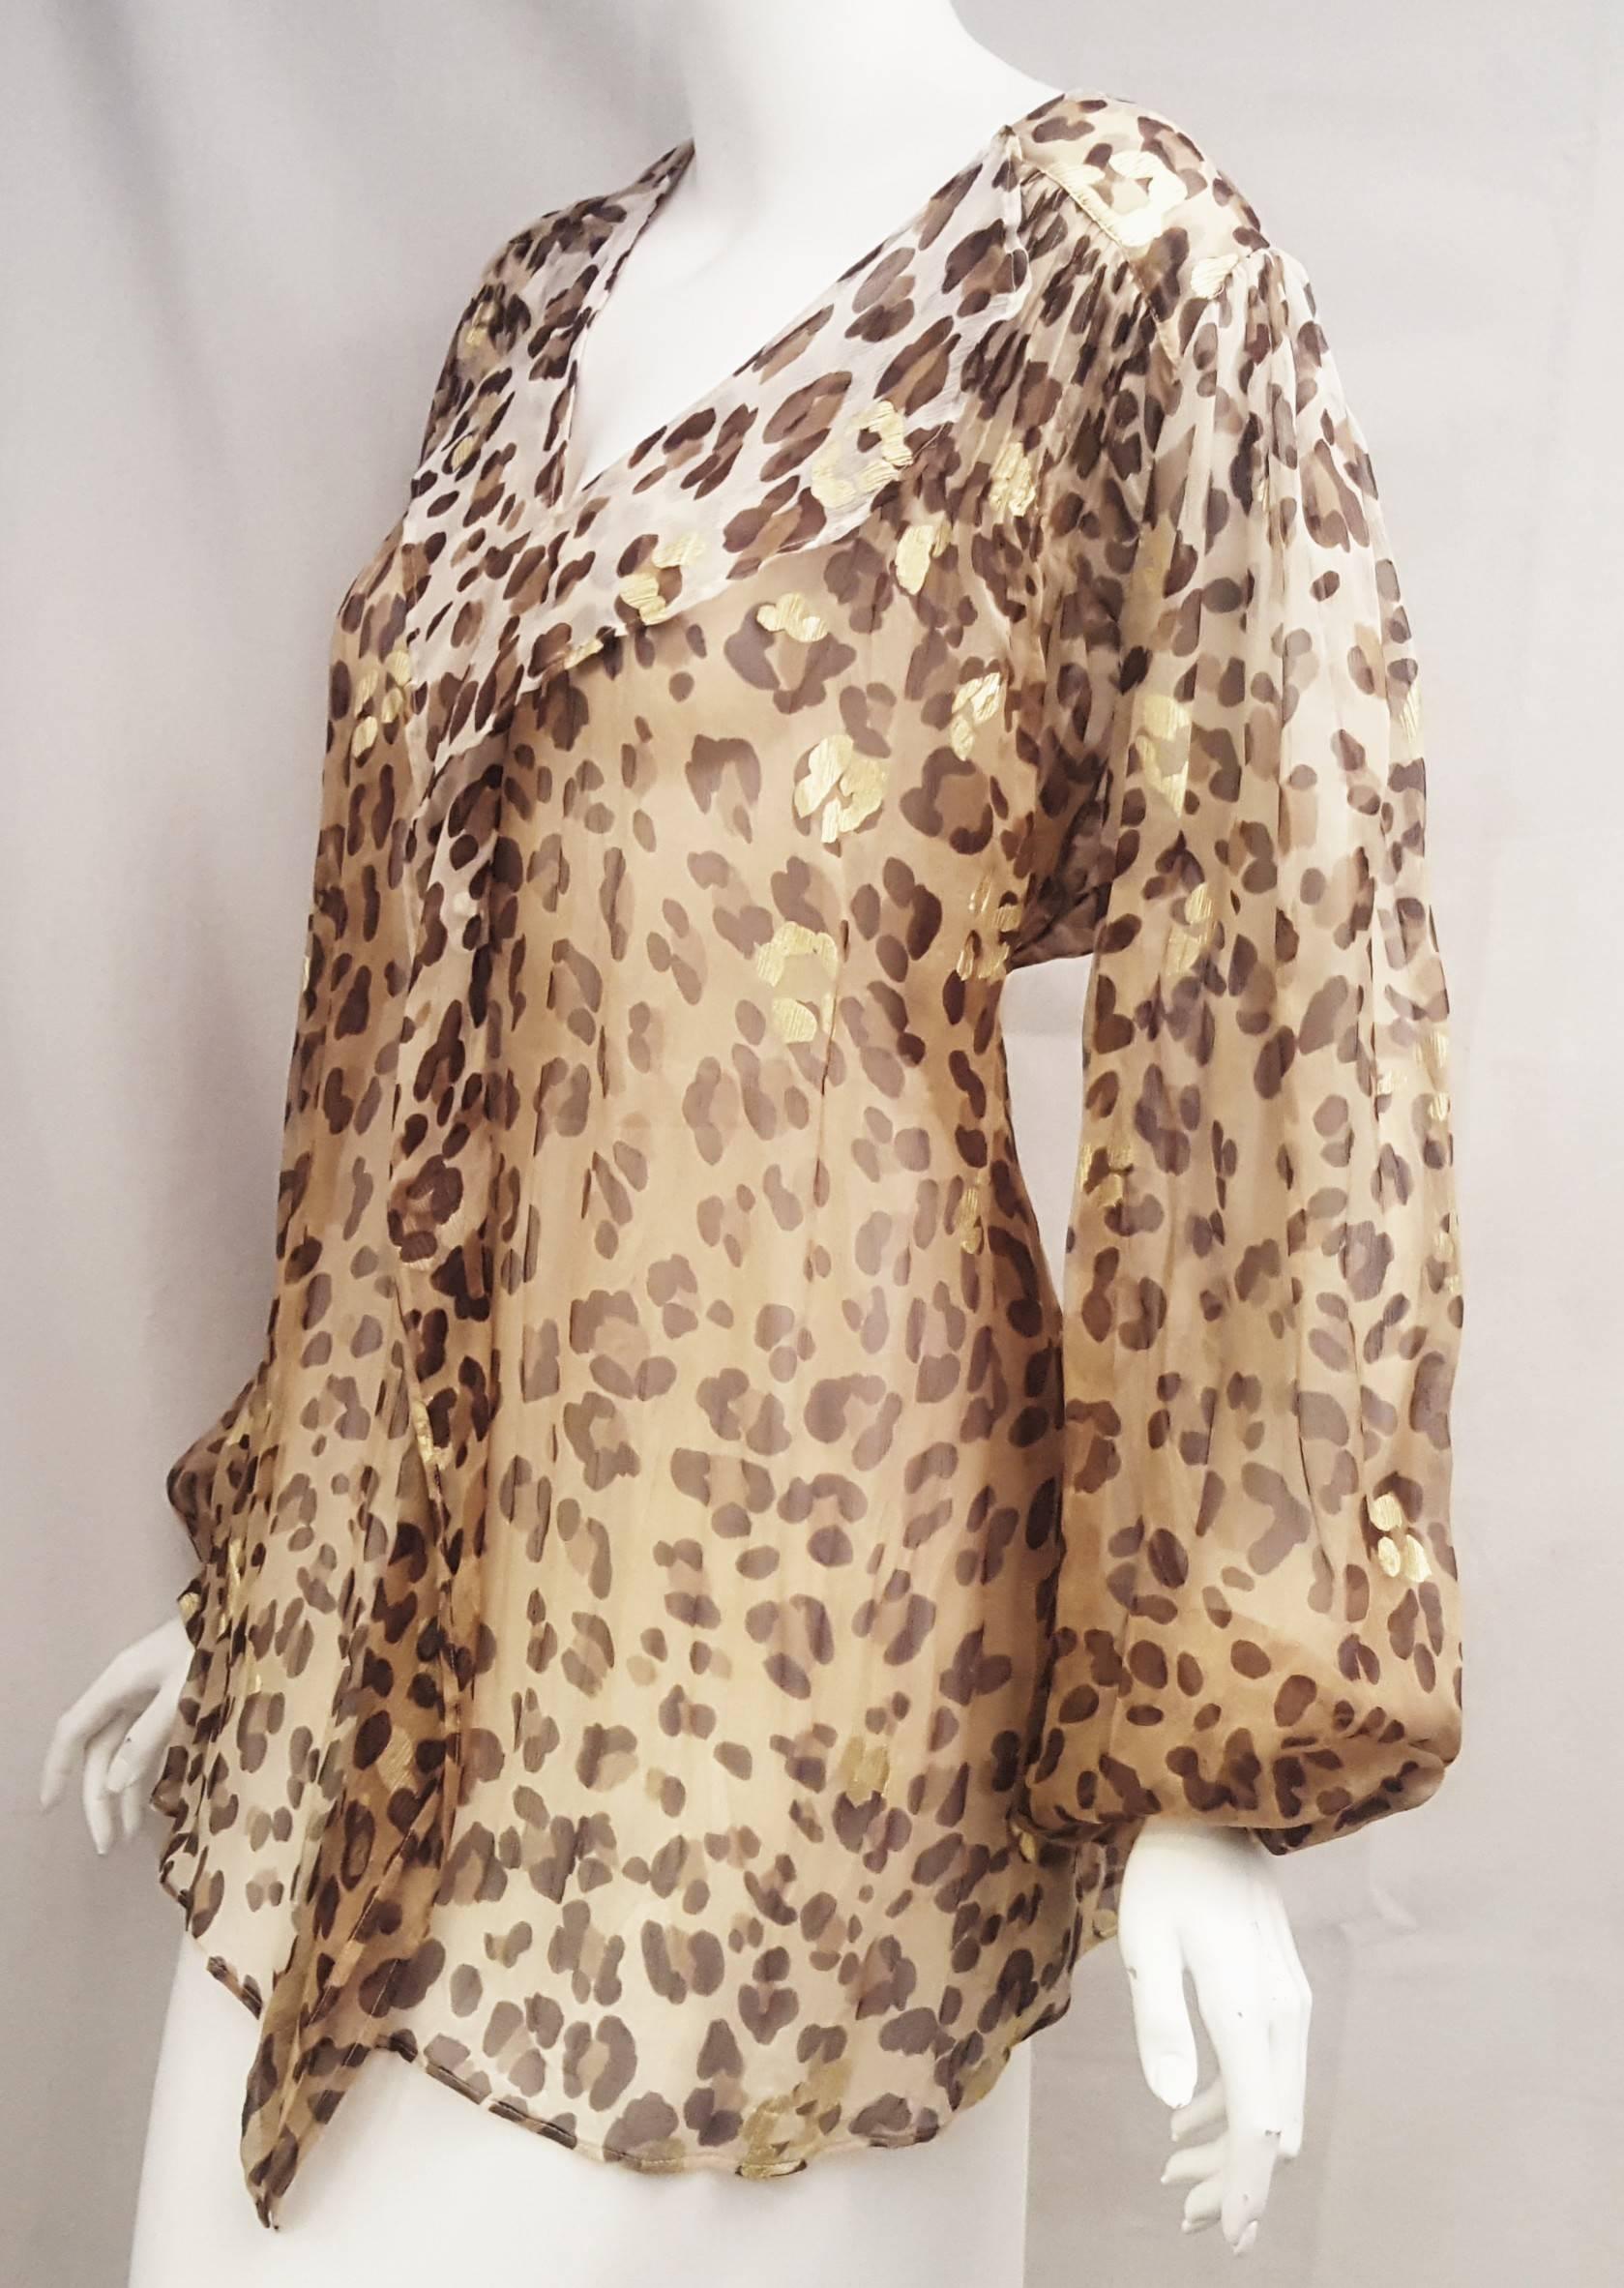 This Blumarine Leopard print silk top with ruffles at neckline and at front in transparent silk is easy to wear by the pool with a bathing suit or with a pair of jean.  It is loose fitting, not lined and in excellent condition.  The long sleeves